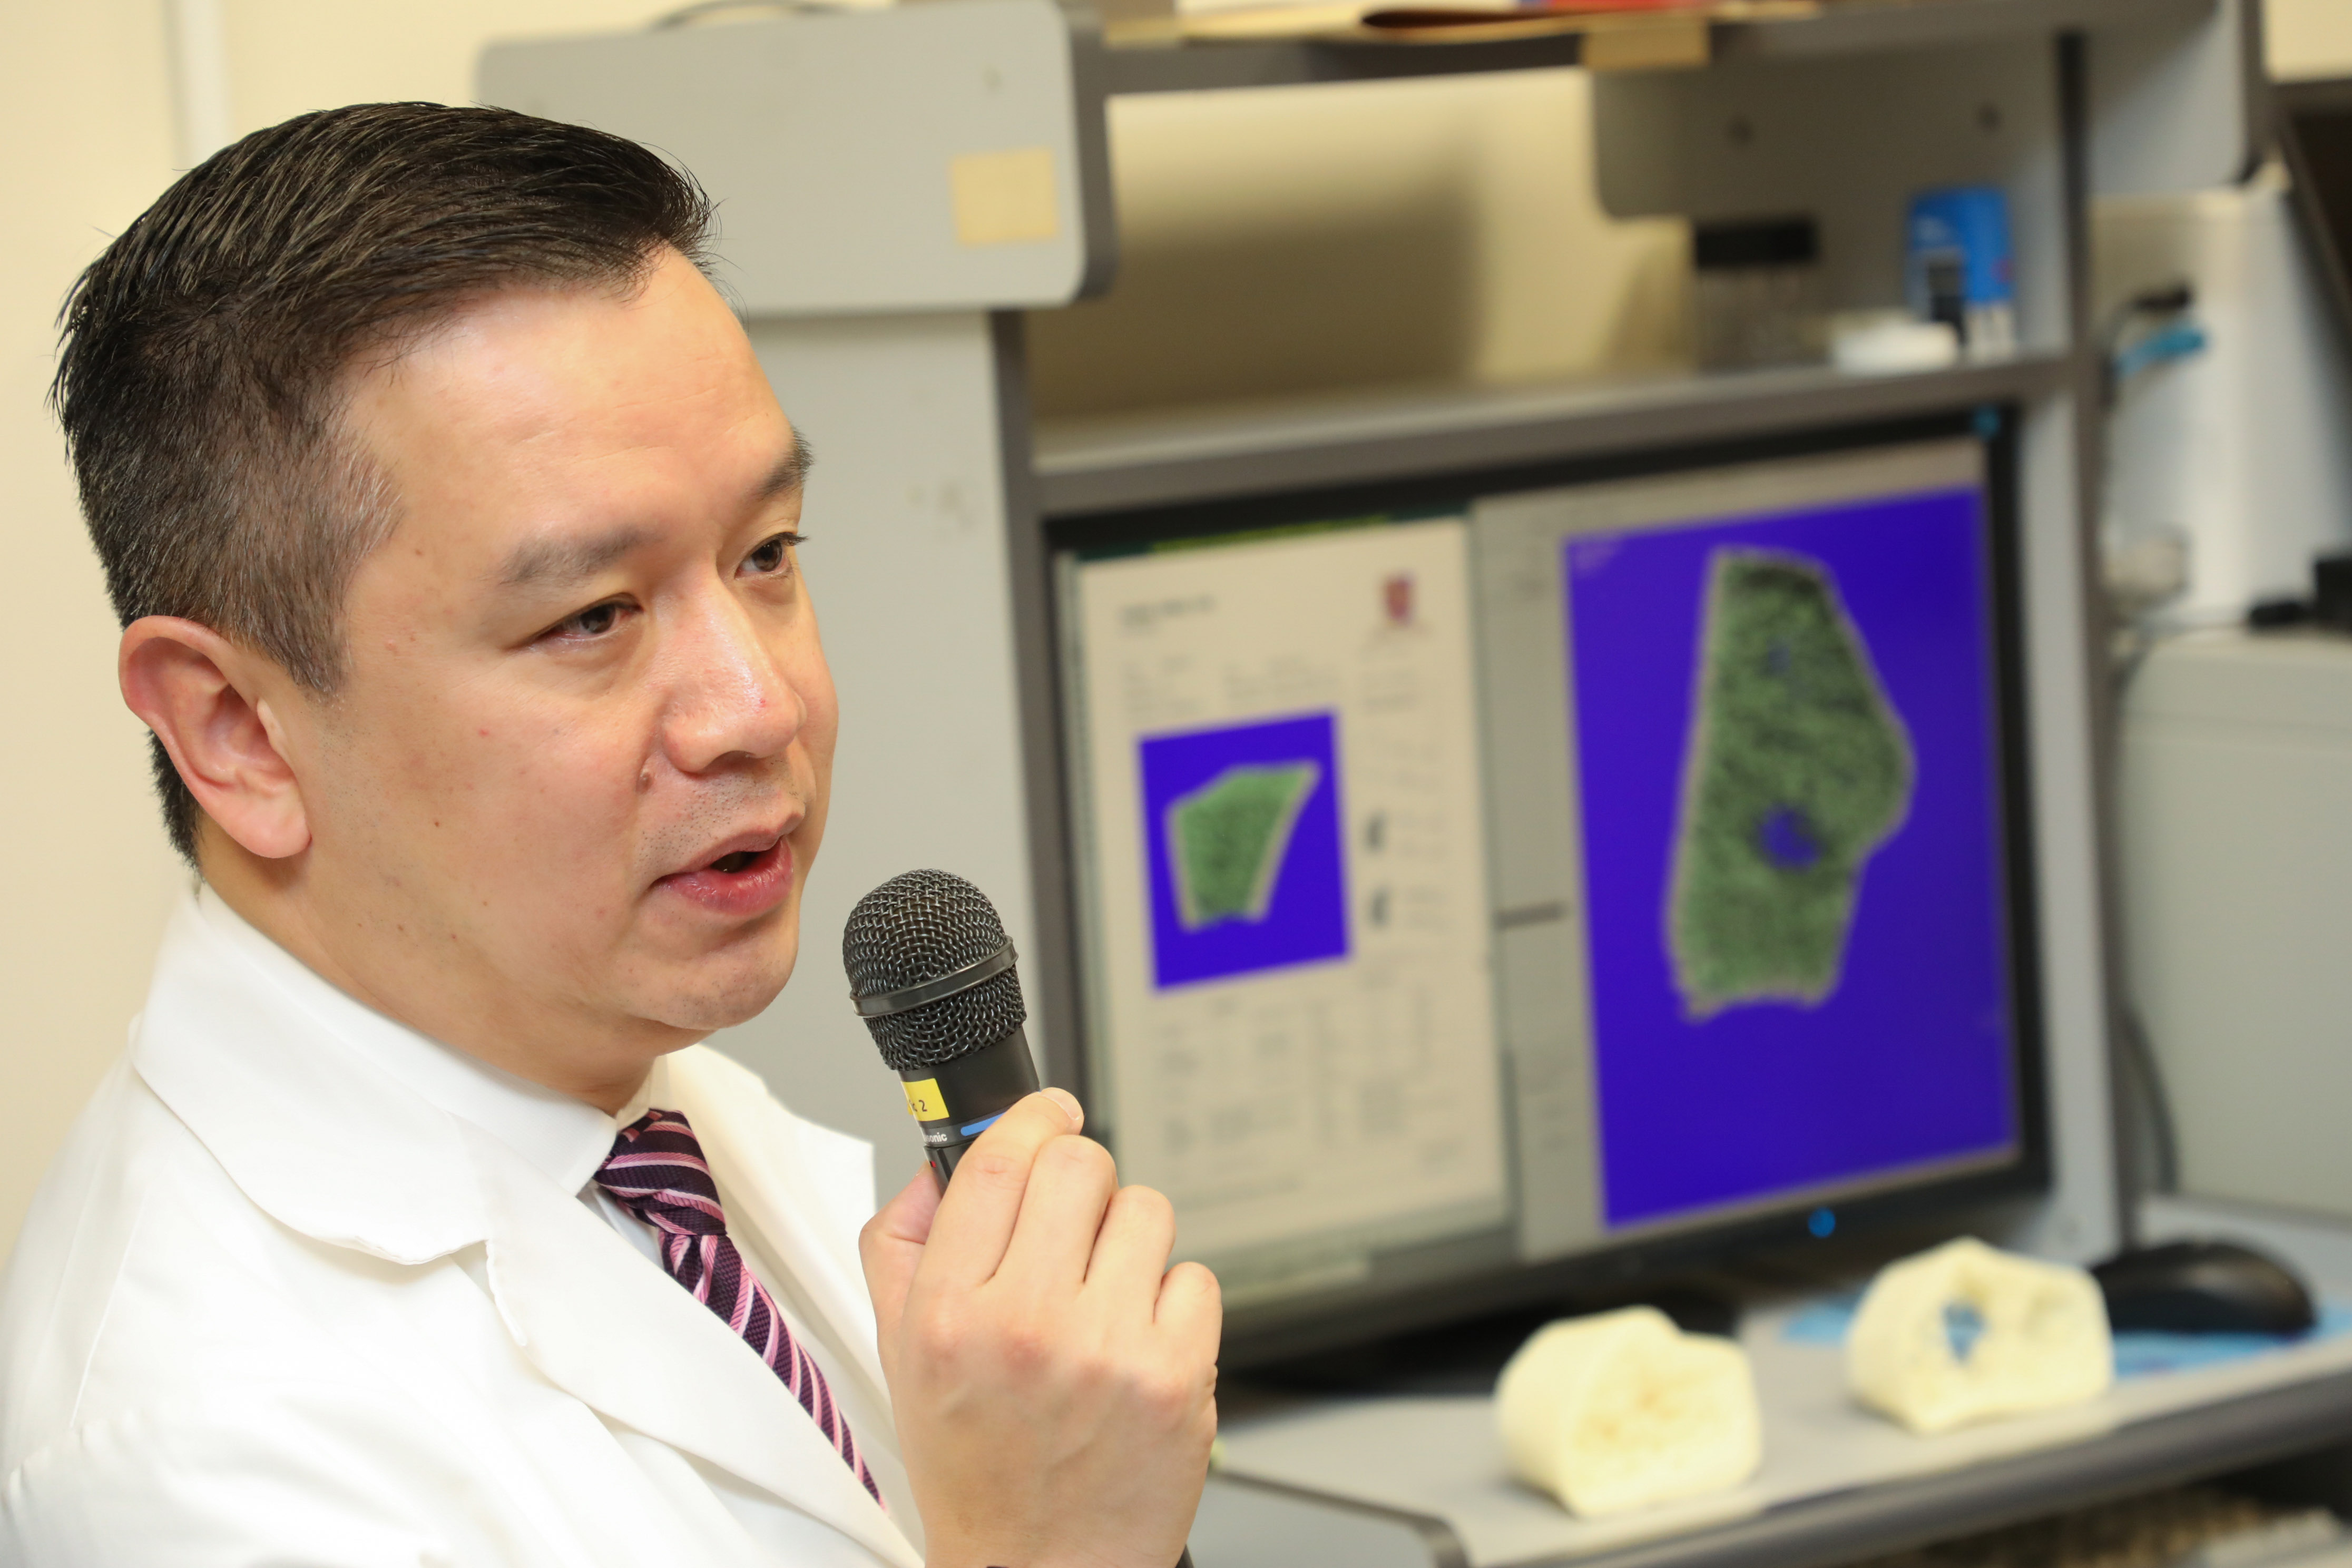 Professor Patrick YUNG, Chairman of the Department of Orthopaedics and Traumatology of the Faculty of Medicine at CUHK